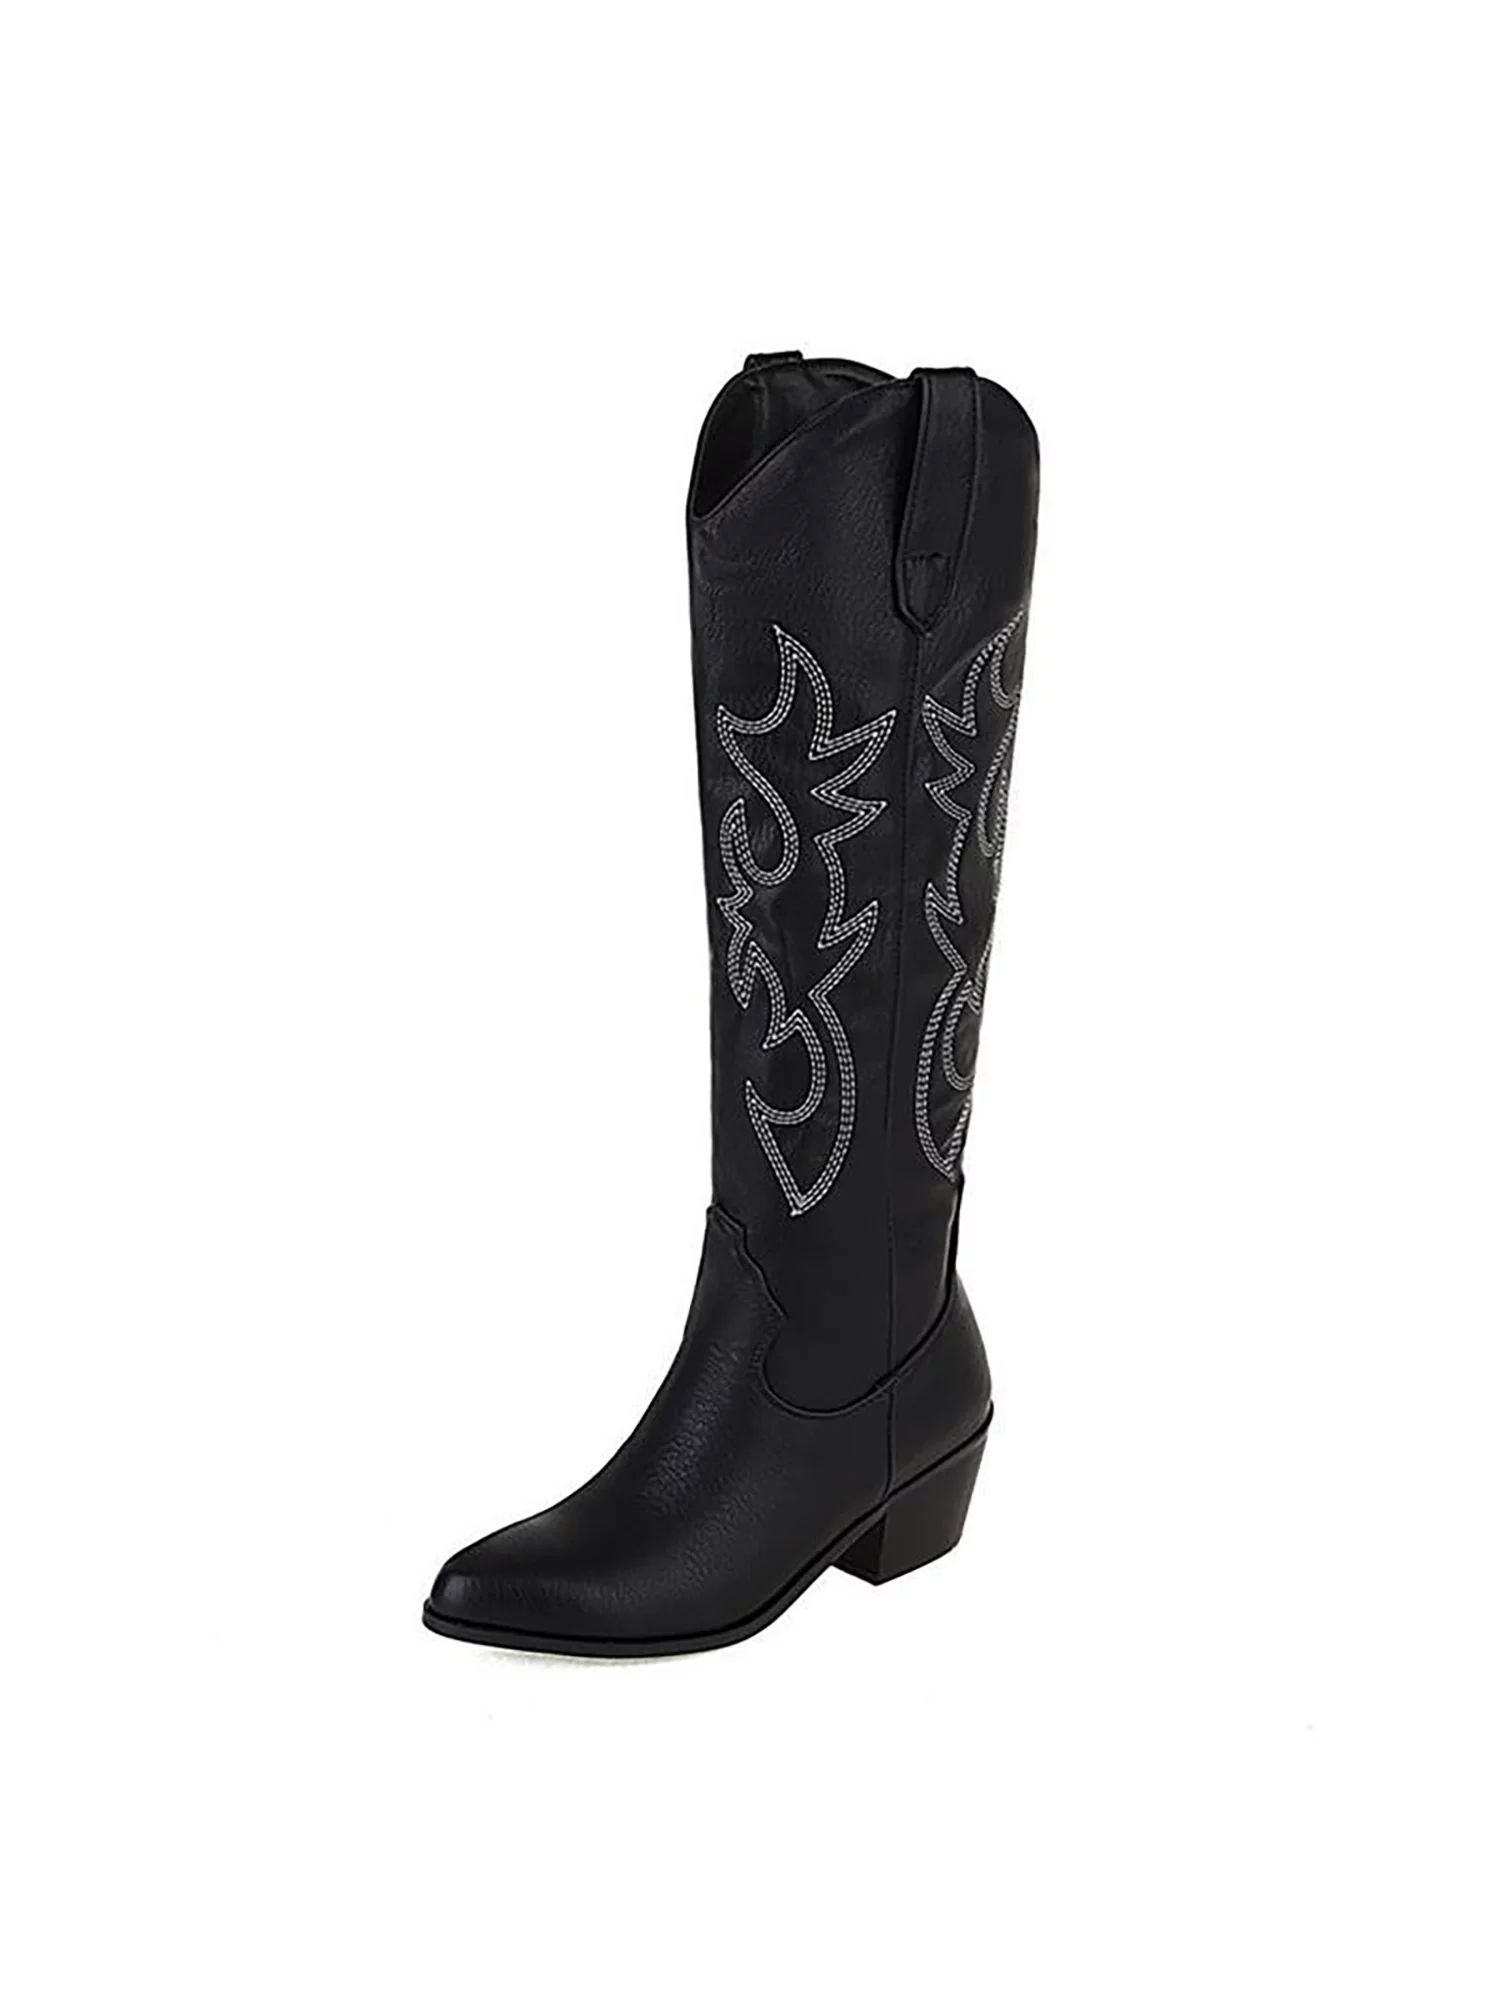 Daeful Cowgirl Boots for Women Embroidered Knee High Cowboy Boots Fashion Pull on Tall Western Bo... | Walmart (US)